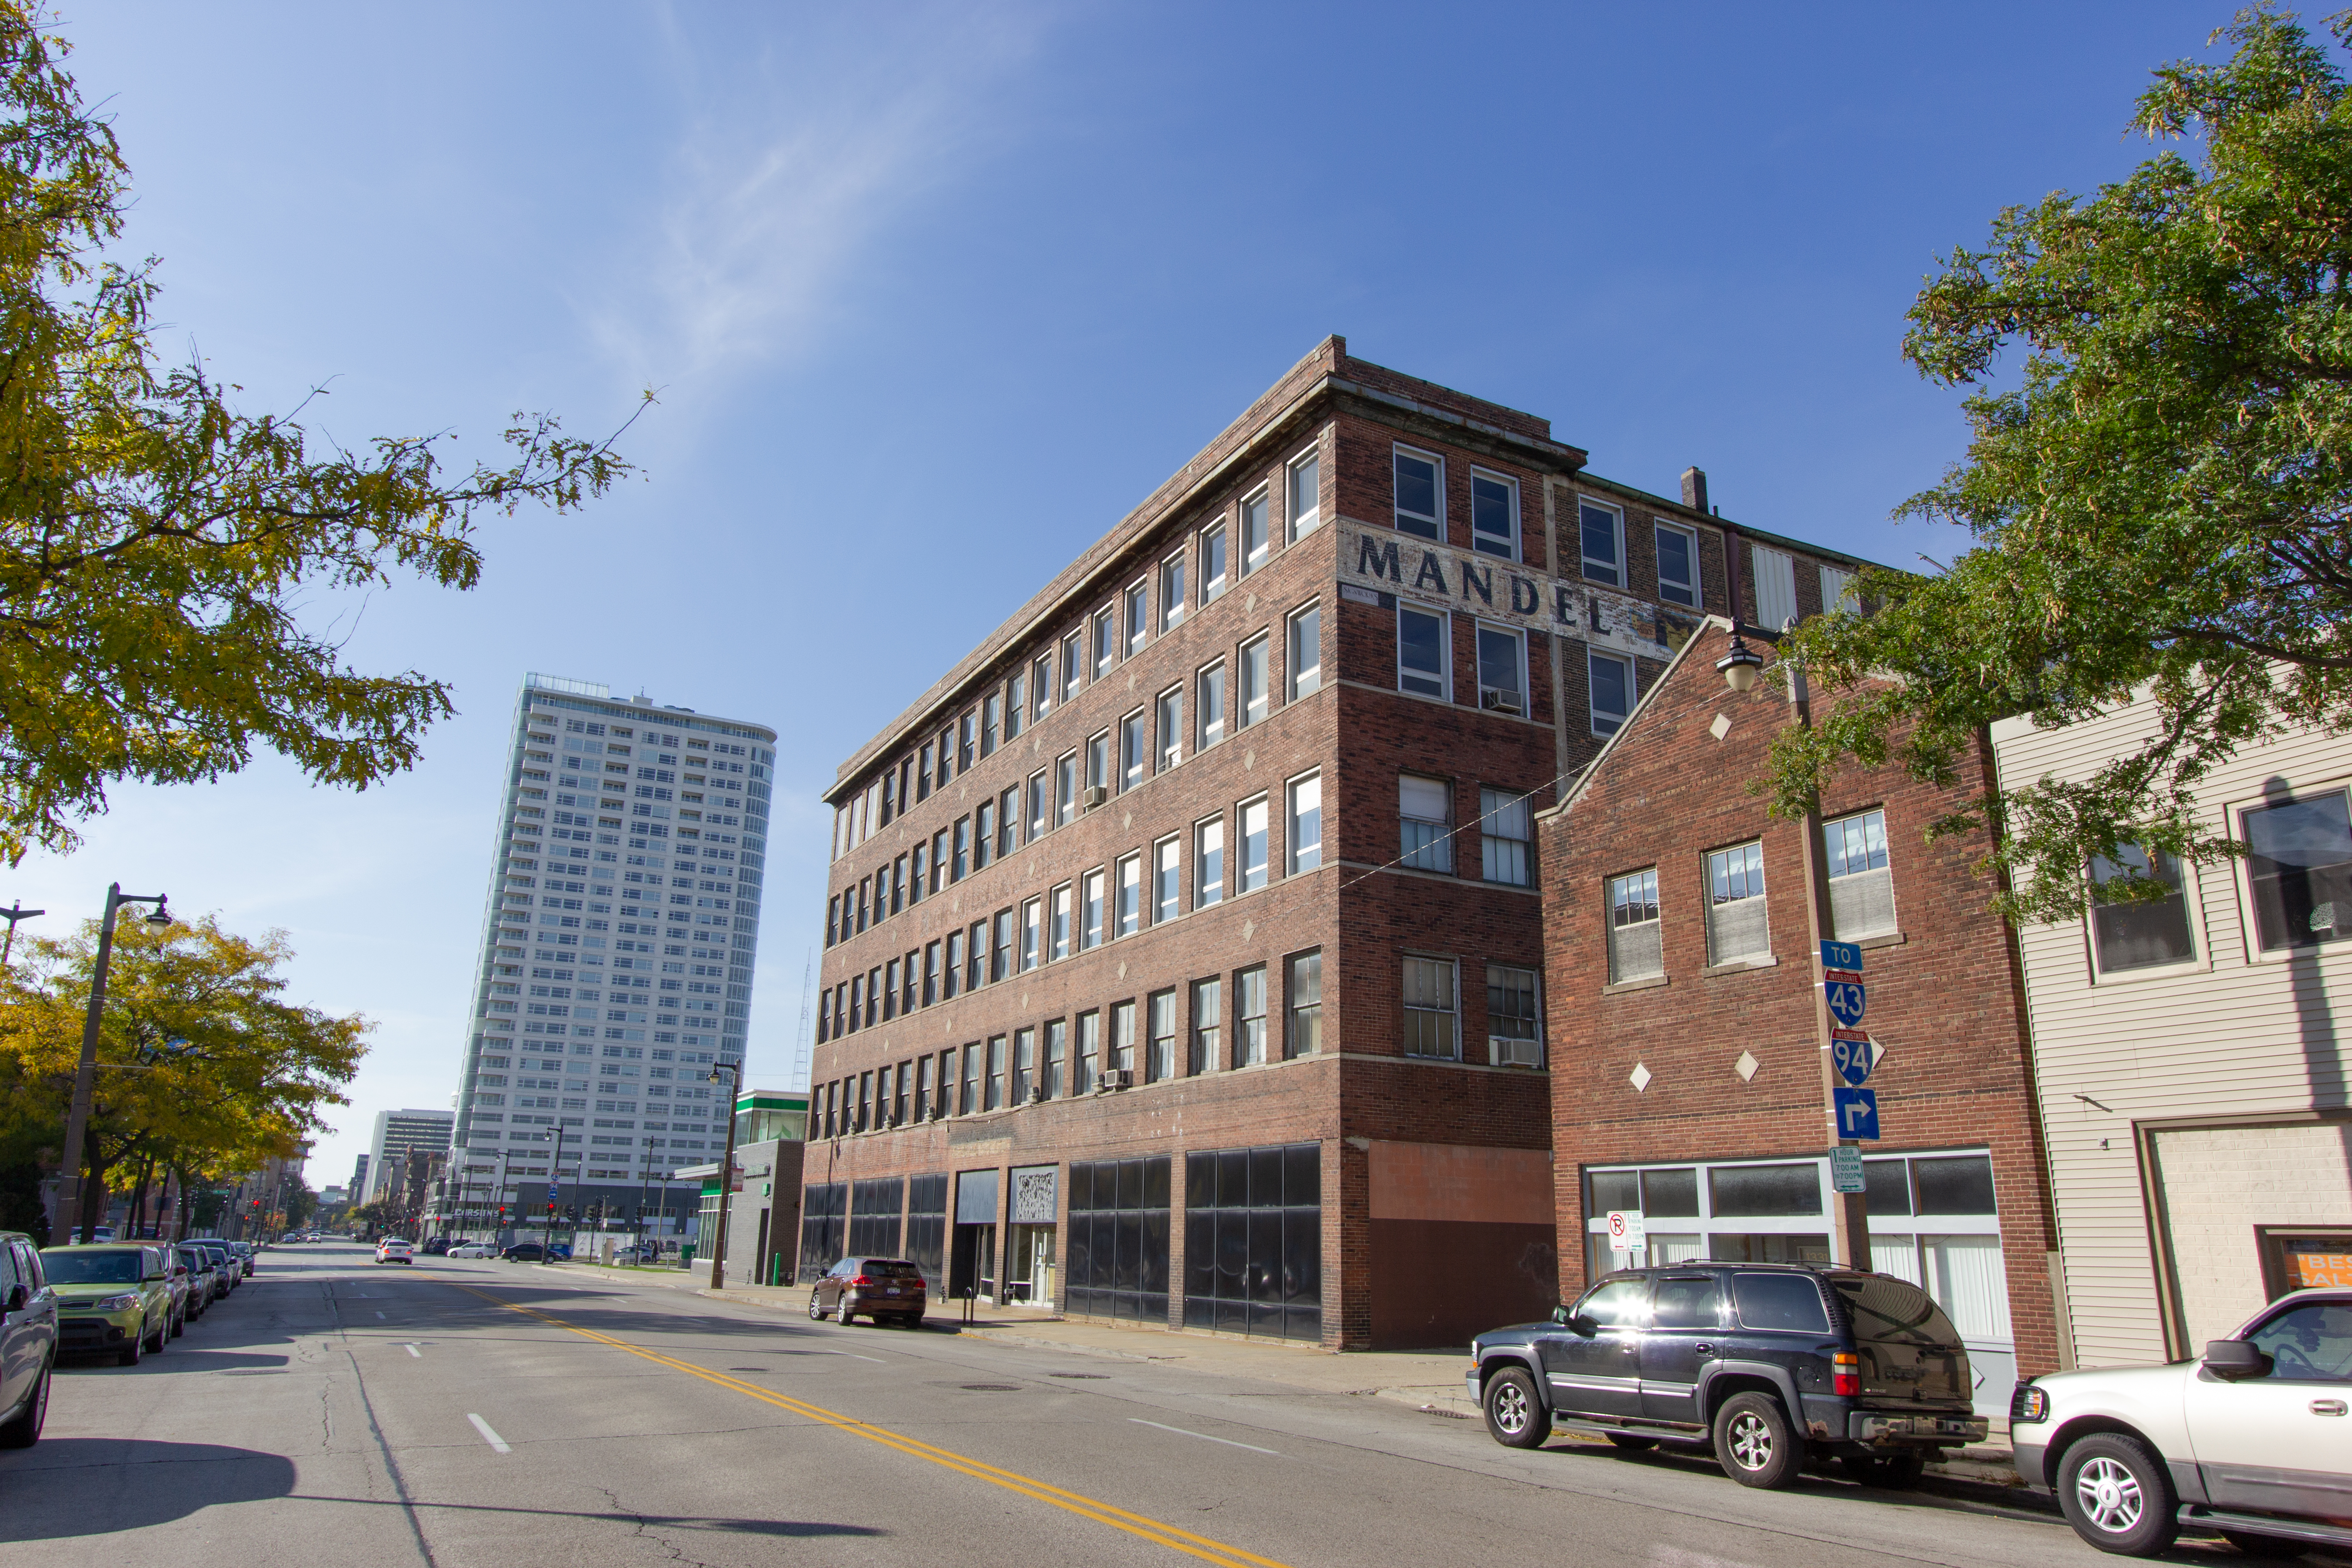 American Family and MB Acquisition, LLC enter a joint venture to revitalize Mandel building in Milwaukee